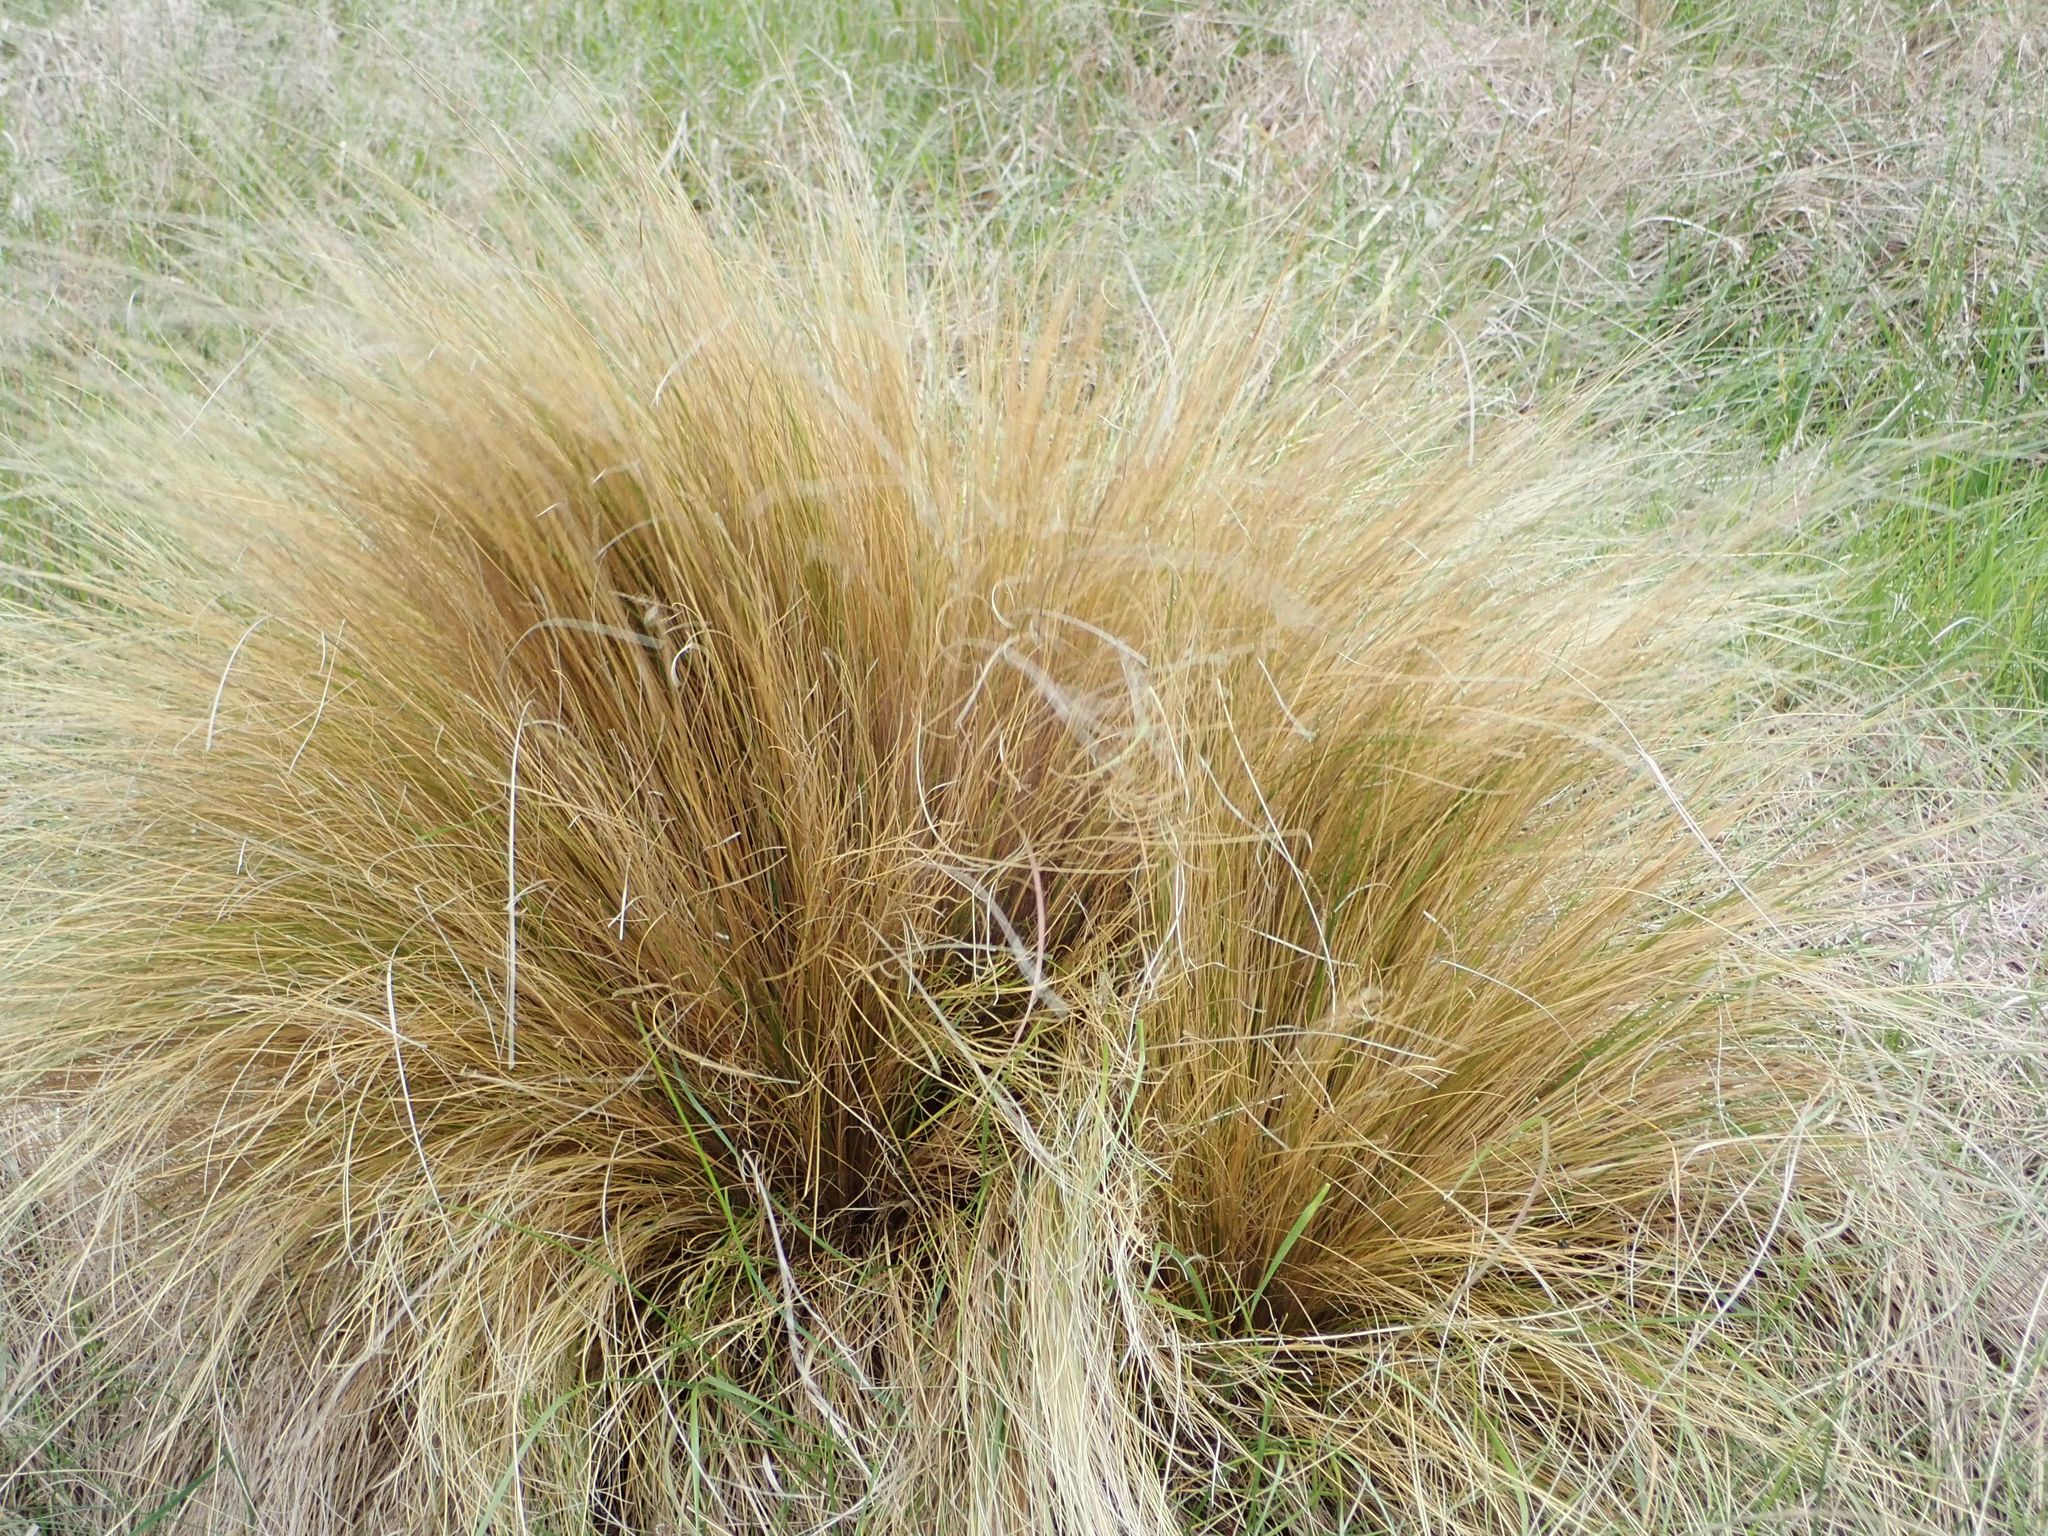 Photograph of a clump of yellowish hard tussock grass.